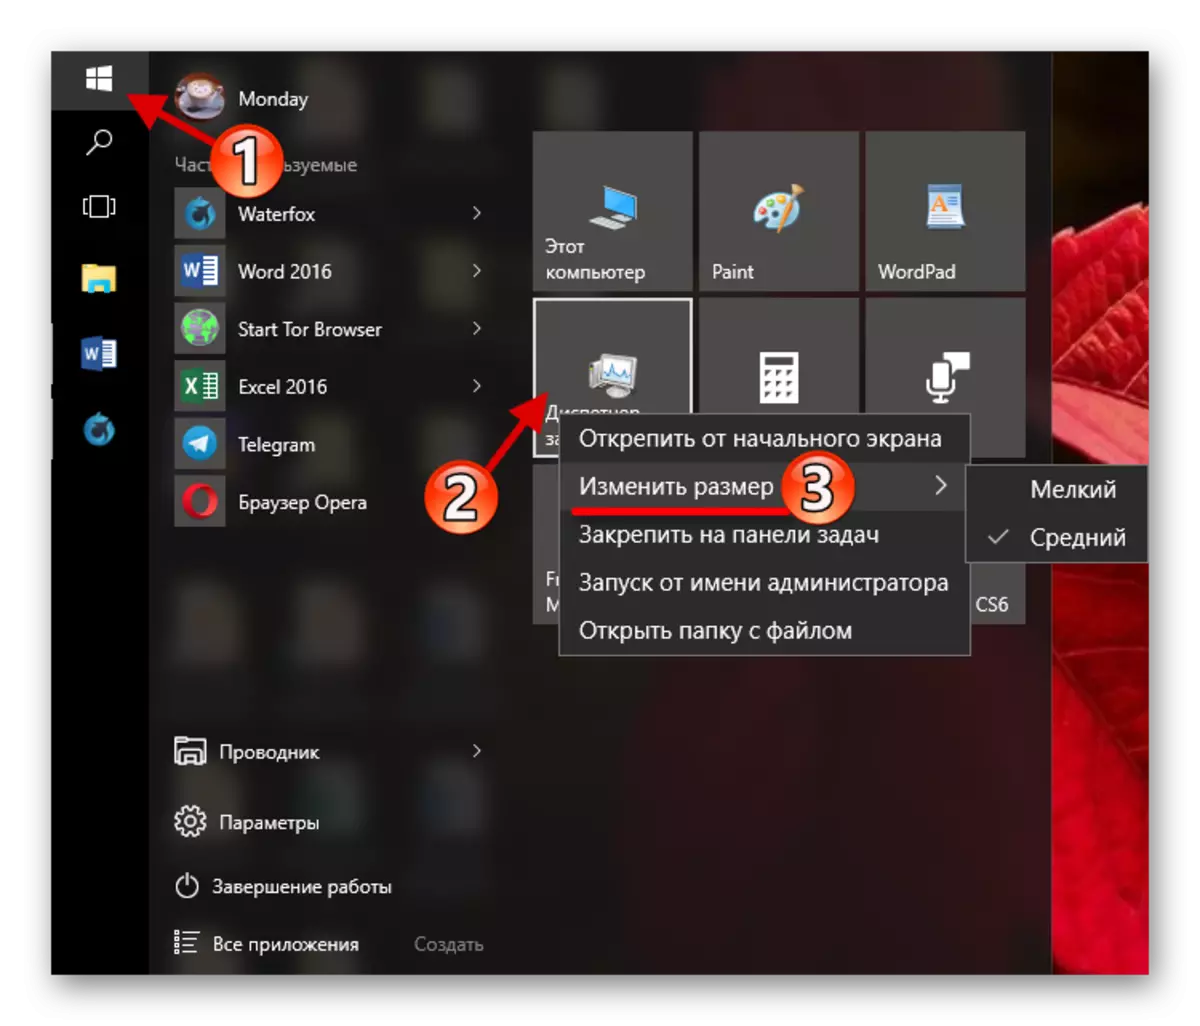 Changing the size of the element in the Windows 10 Start menu